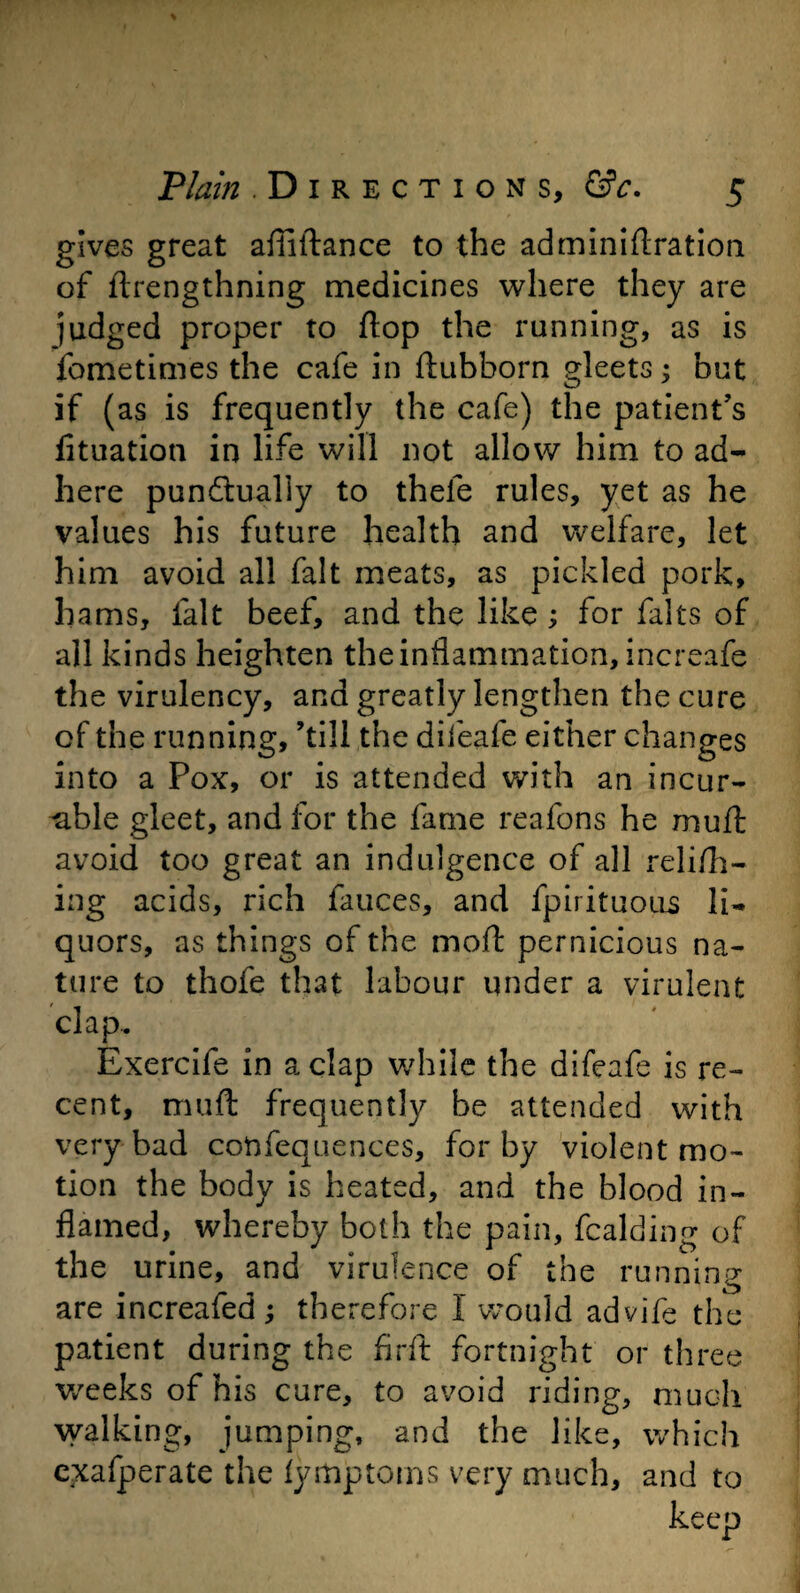 gives great afliftance to the adminiftration of flrengthning medicines where they are judged proper to flop the running, as is fometimes the cafe in ftubborn gleets; but if (as is frequently the cafe) the patient’s fituation in life will not allow him to ad¬ here punctually to thele rules, yet as he values his future health and welfare, let him avoid all fait meats, as pickled pork, hams, fait beef, and the like; for falts of all kinds heighten the inflammation, increafe the virulency, and greatly lengthen the cure of the running, ’till the difeafe either changes into a Pox, or is attended with an incur¬ able gleet, and for the fame reafons he muff avoid too great an indulgence of all relish¬ ing acids, rich fauces, and fpirituous li¬ quors, as things of the moil pernicious na¬ ture to thofe that labour under a virulent clap. Exercife in a clap while the difeafe is re¬ cent, muft frequently be attended with very bad confequences, for by violent mo¬ tion the body is heated, and the blood in¬ flamed, whereby both the pain, fcalding of the urine, and virulence of the running are increafed; therefore I would advife the patient during the firft fortnight or three weeks of his cure, to avoid riding, much walking, jumping, and the like, which exafperate the fymptoms very much, and to